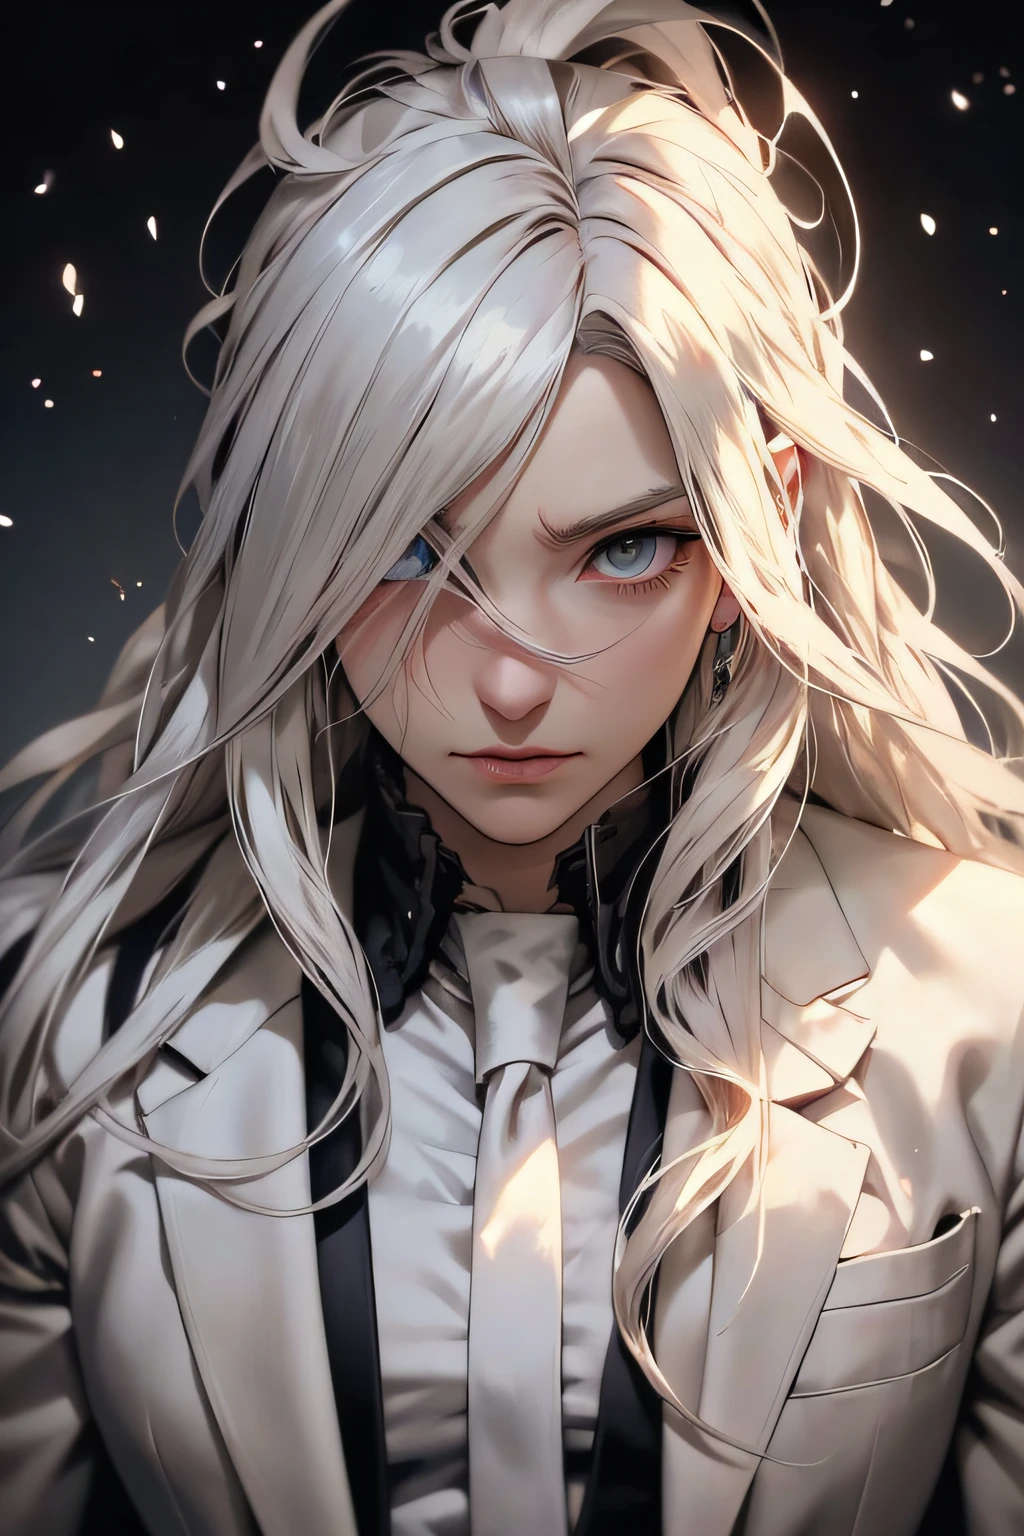 anime character with pure white hair and blue eyes staring at something, Gojo Satorou portrait, Gojo Satorou white hair, kaneki ken, ken kaneki, ufotable art style, Gojo satorou, male anime character, tokyo ghoul, white haired, nagito komaeda from danganronpa, white-haired